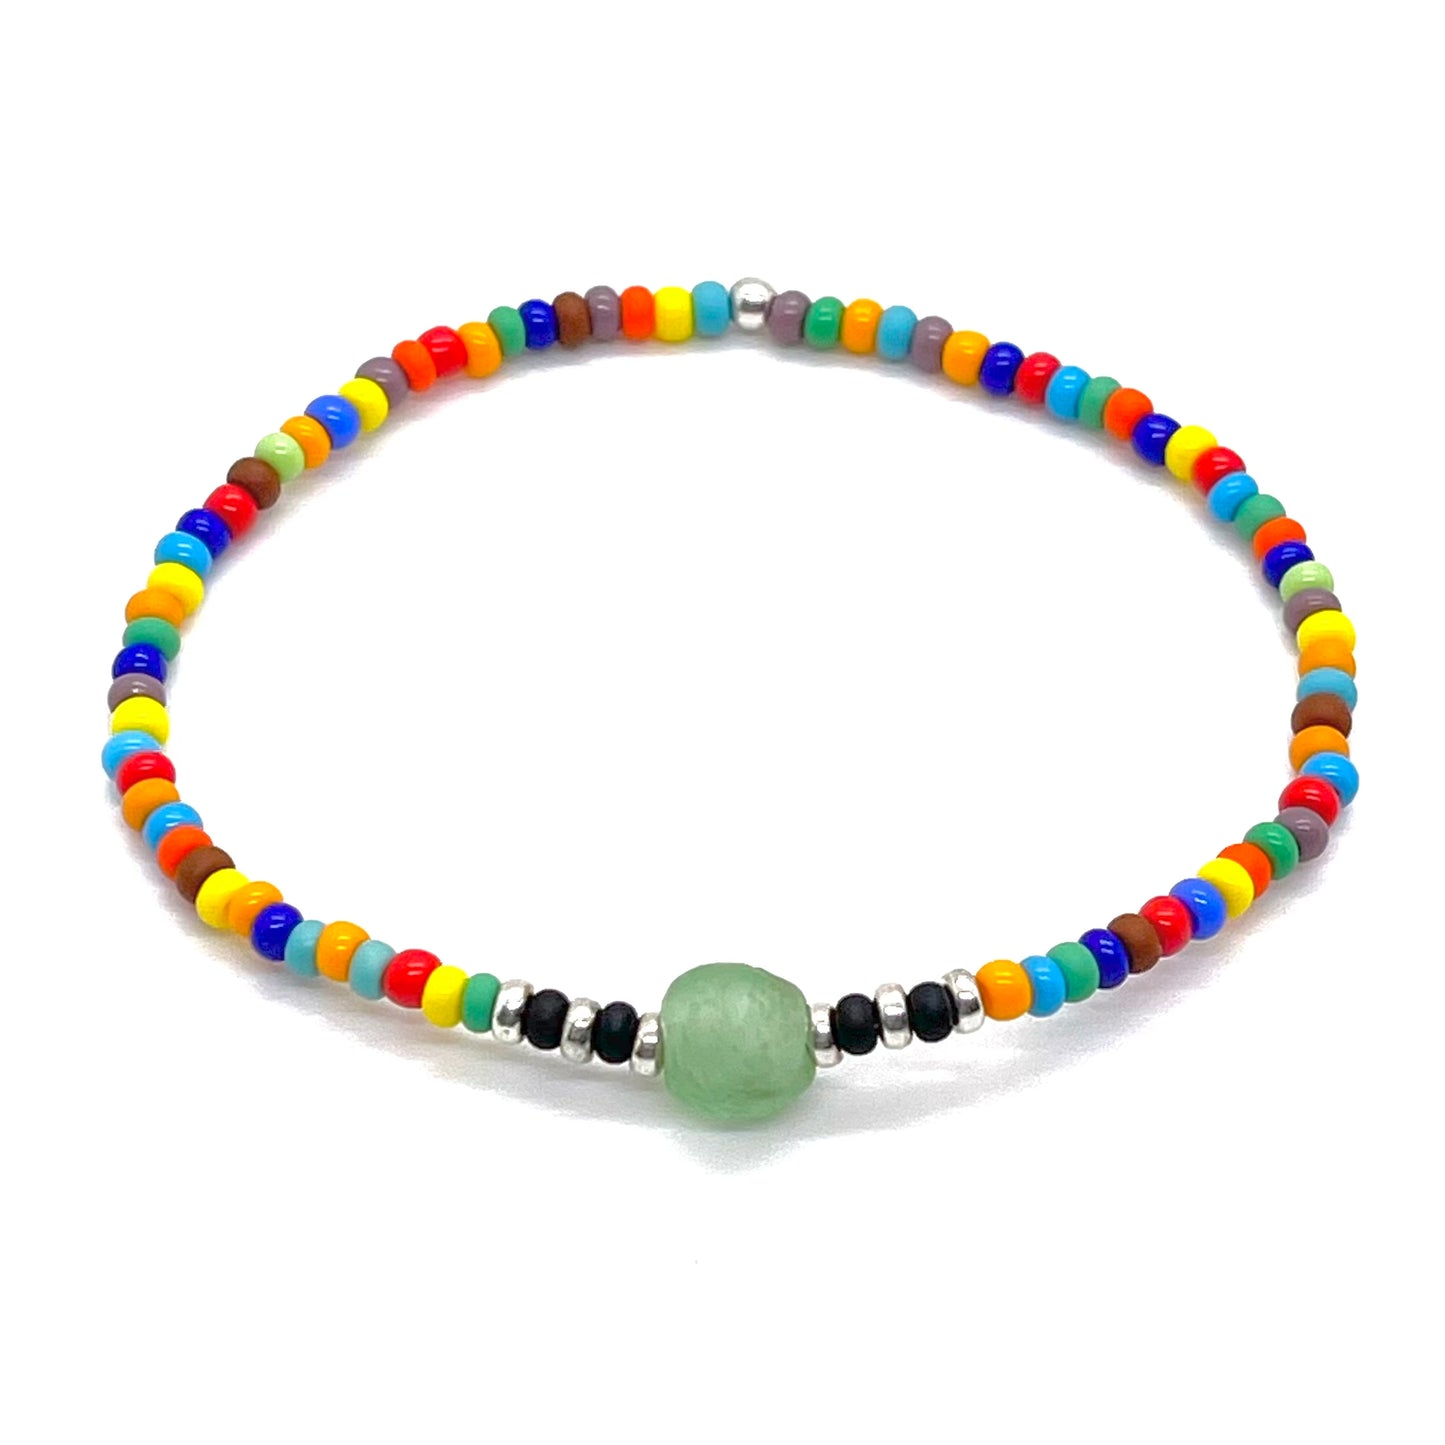 Men's beach bracelet with a mix of brightly colored beads and a green sea glass center bead surrounded by black and silver-tone beads.